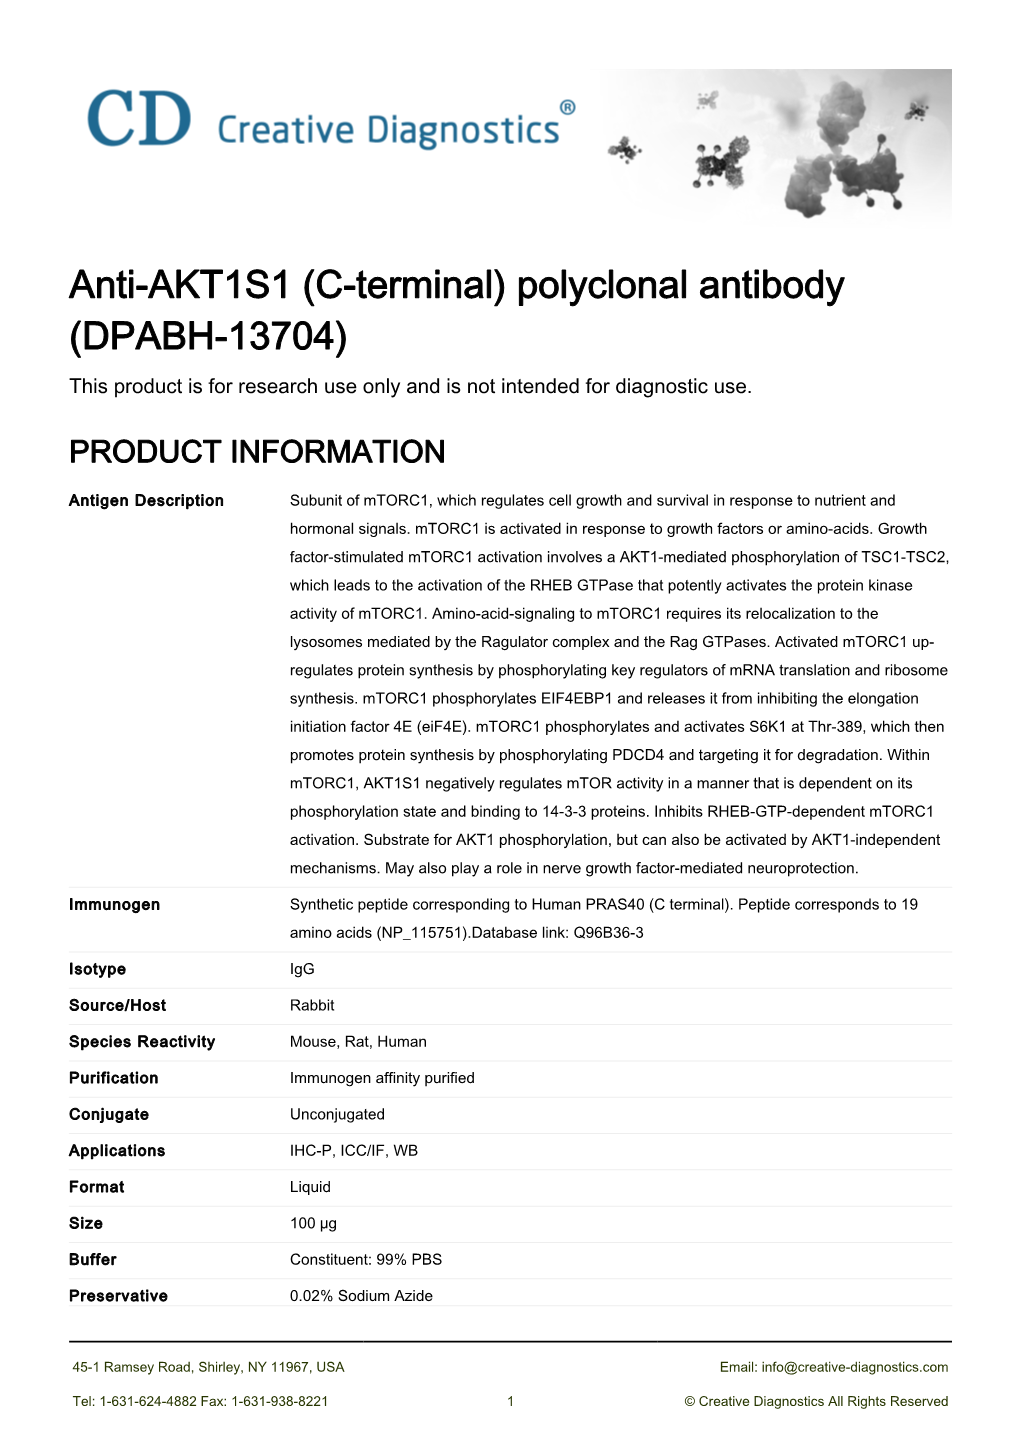 Anti-AKT1S1 (C-Terminal) Polyclonal Antibody (DPABH-13704) This Product Is for Research Use Only and Is Not Intended for Diagnostic Use